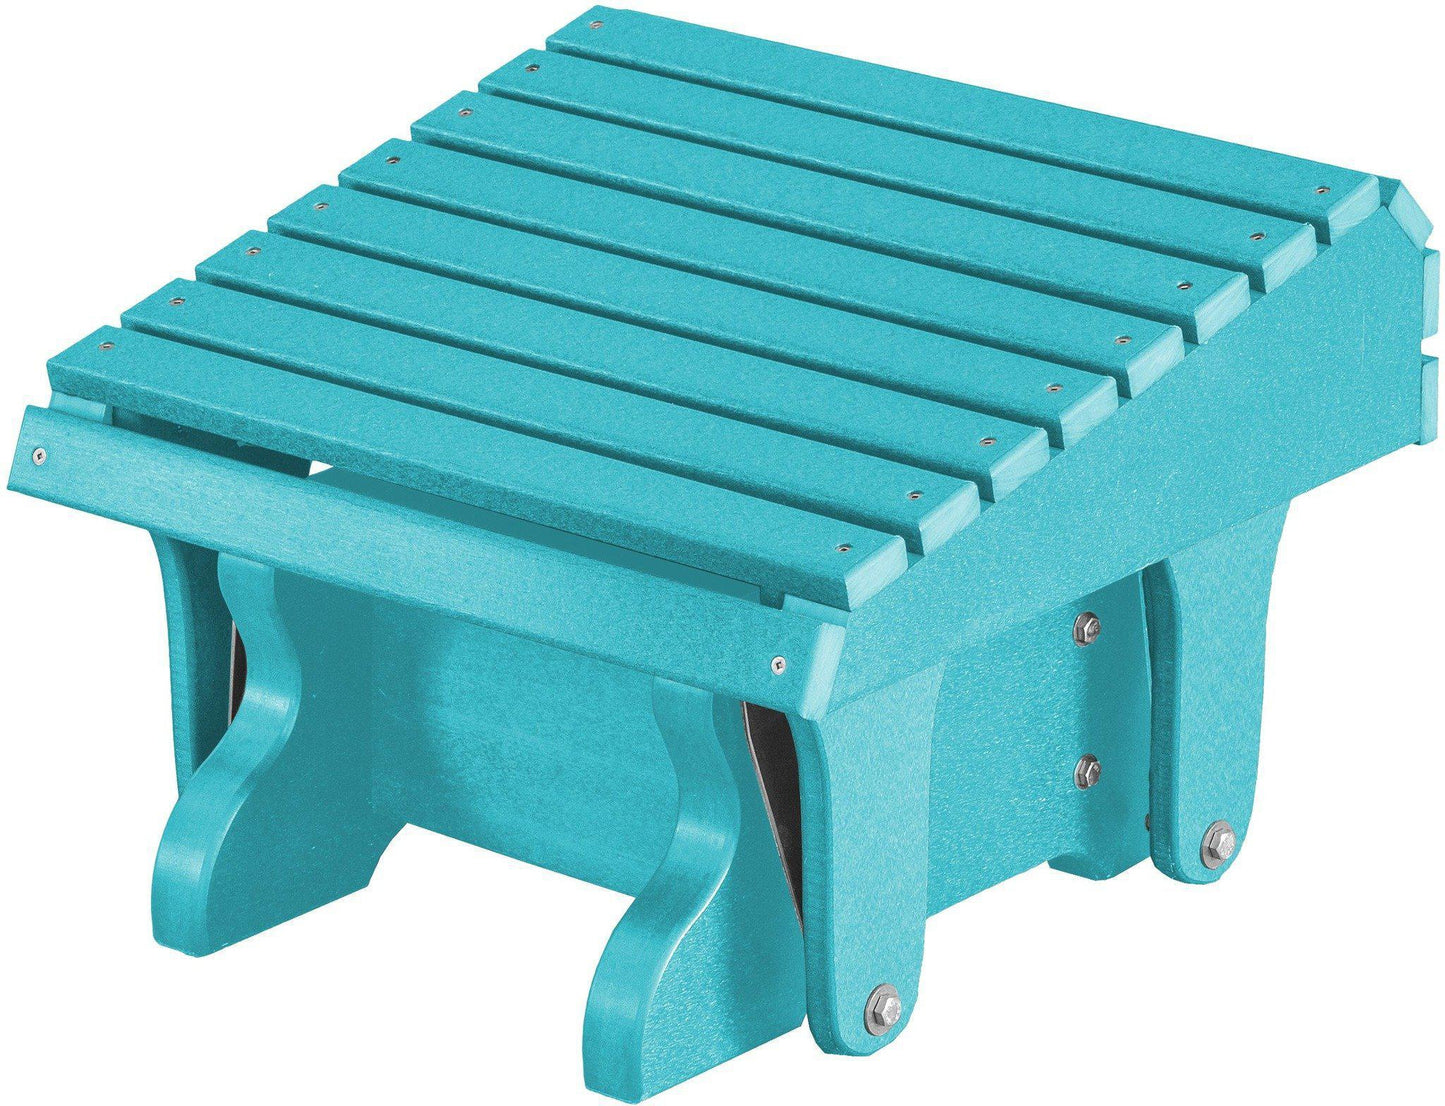 Wildridge Recycled Plastic Heritage Gliding Footrest - LEAD TIME TO SHIP 3 WEEKS